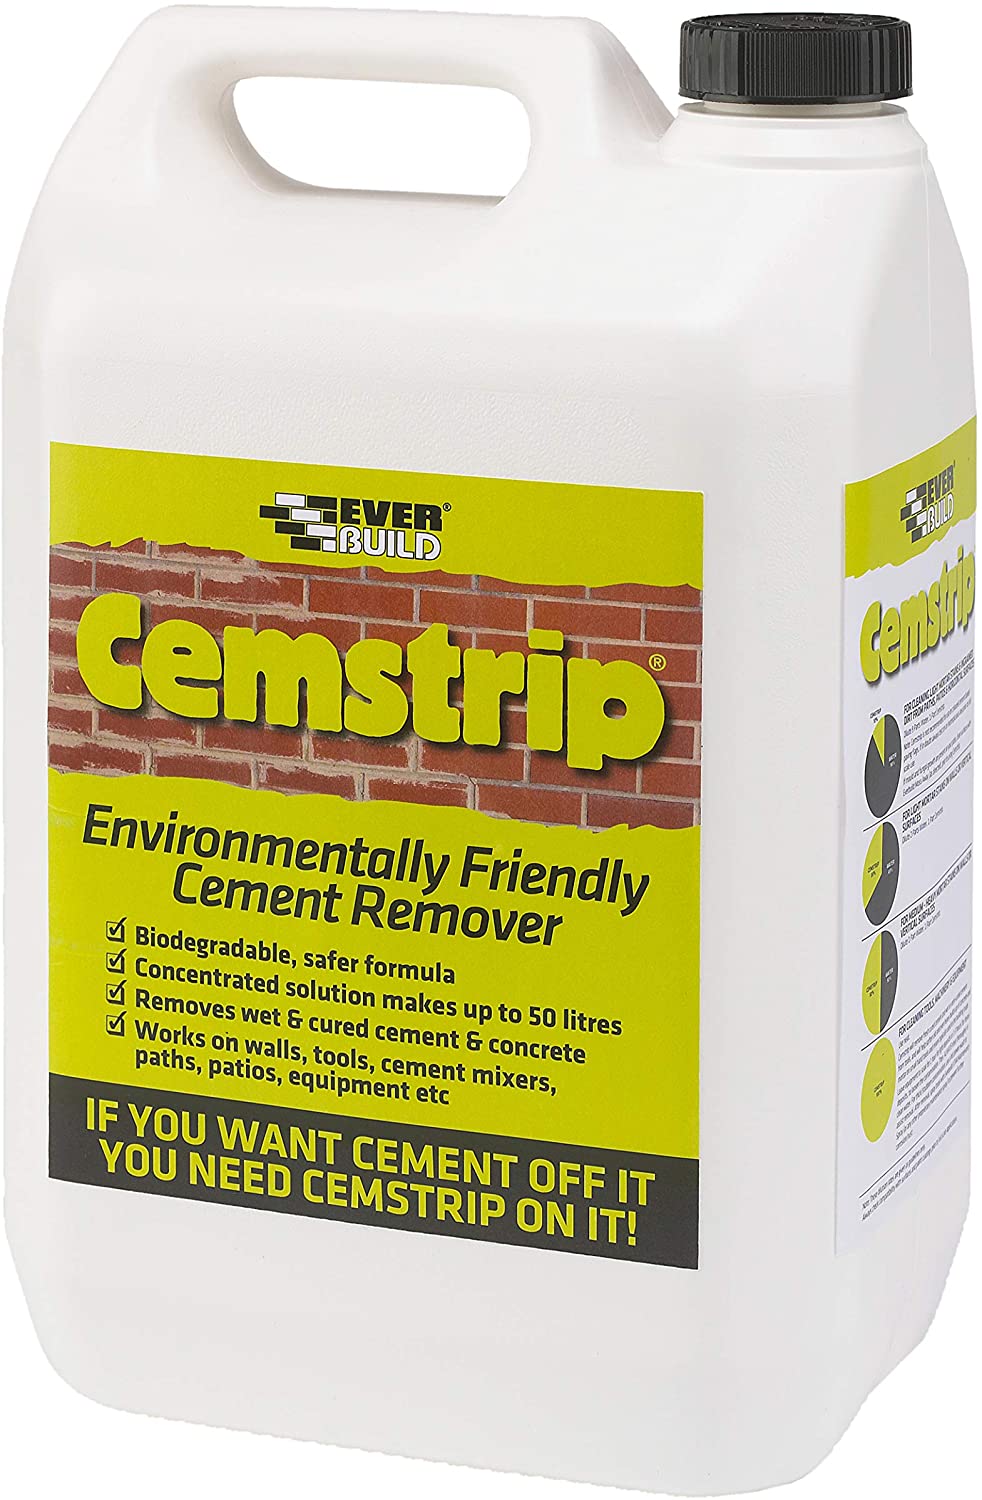 Everbuild Cemstrip Environmentally Friendly Cement Remover Concentrate